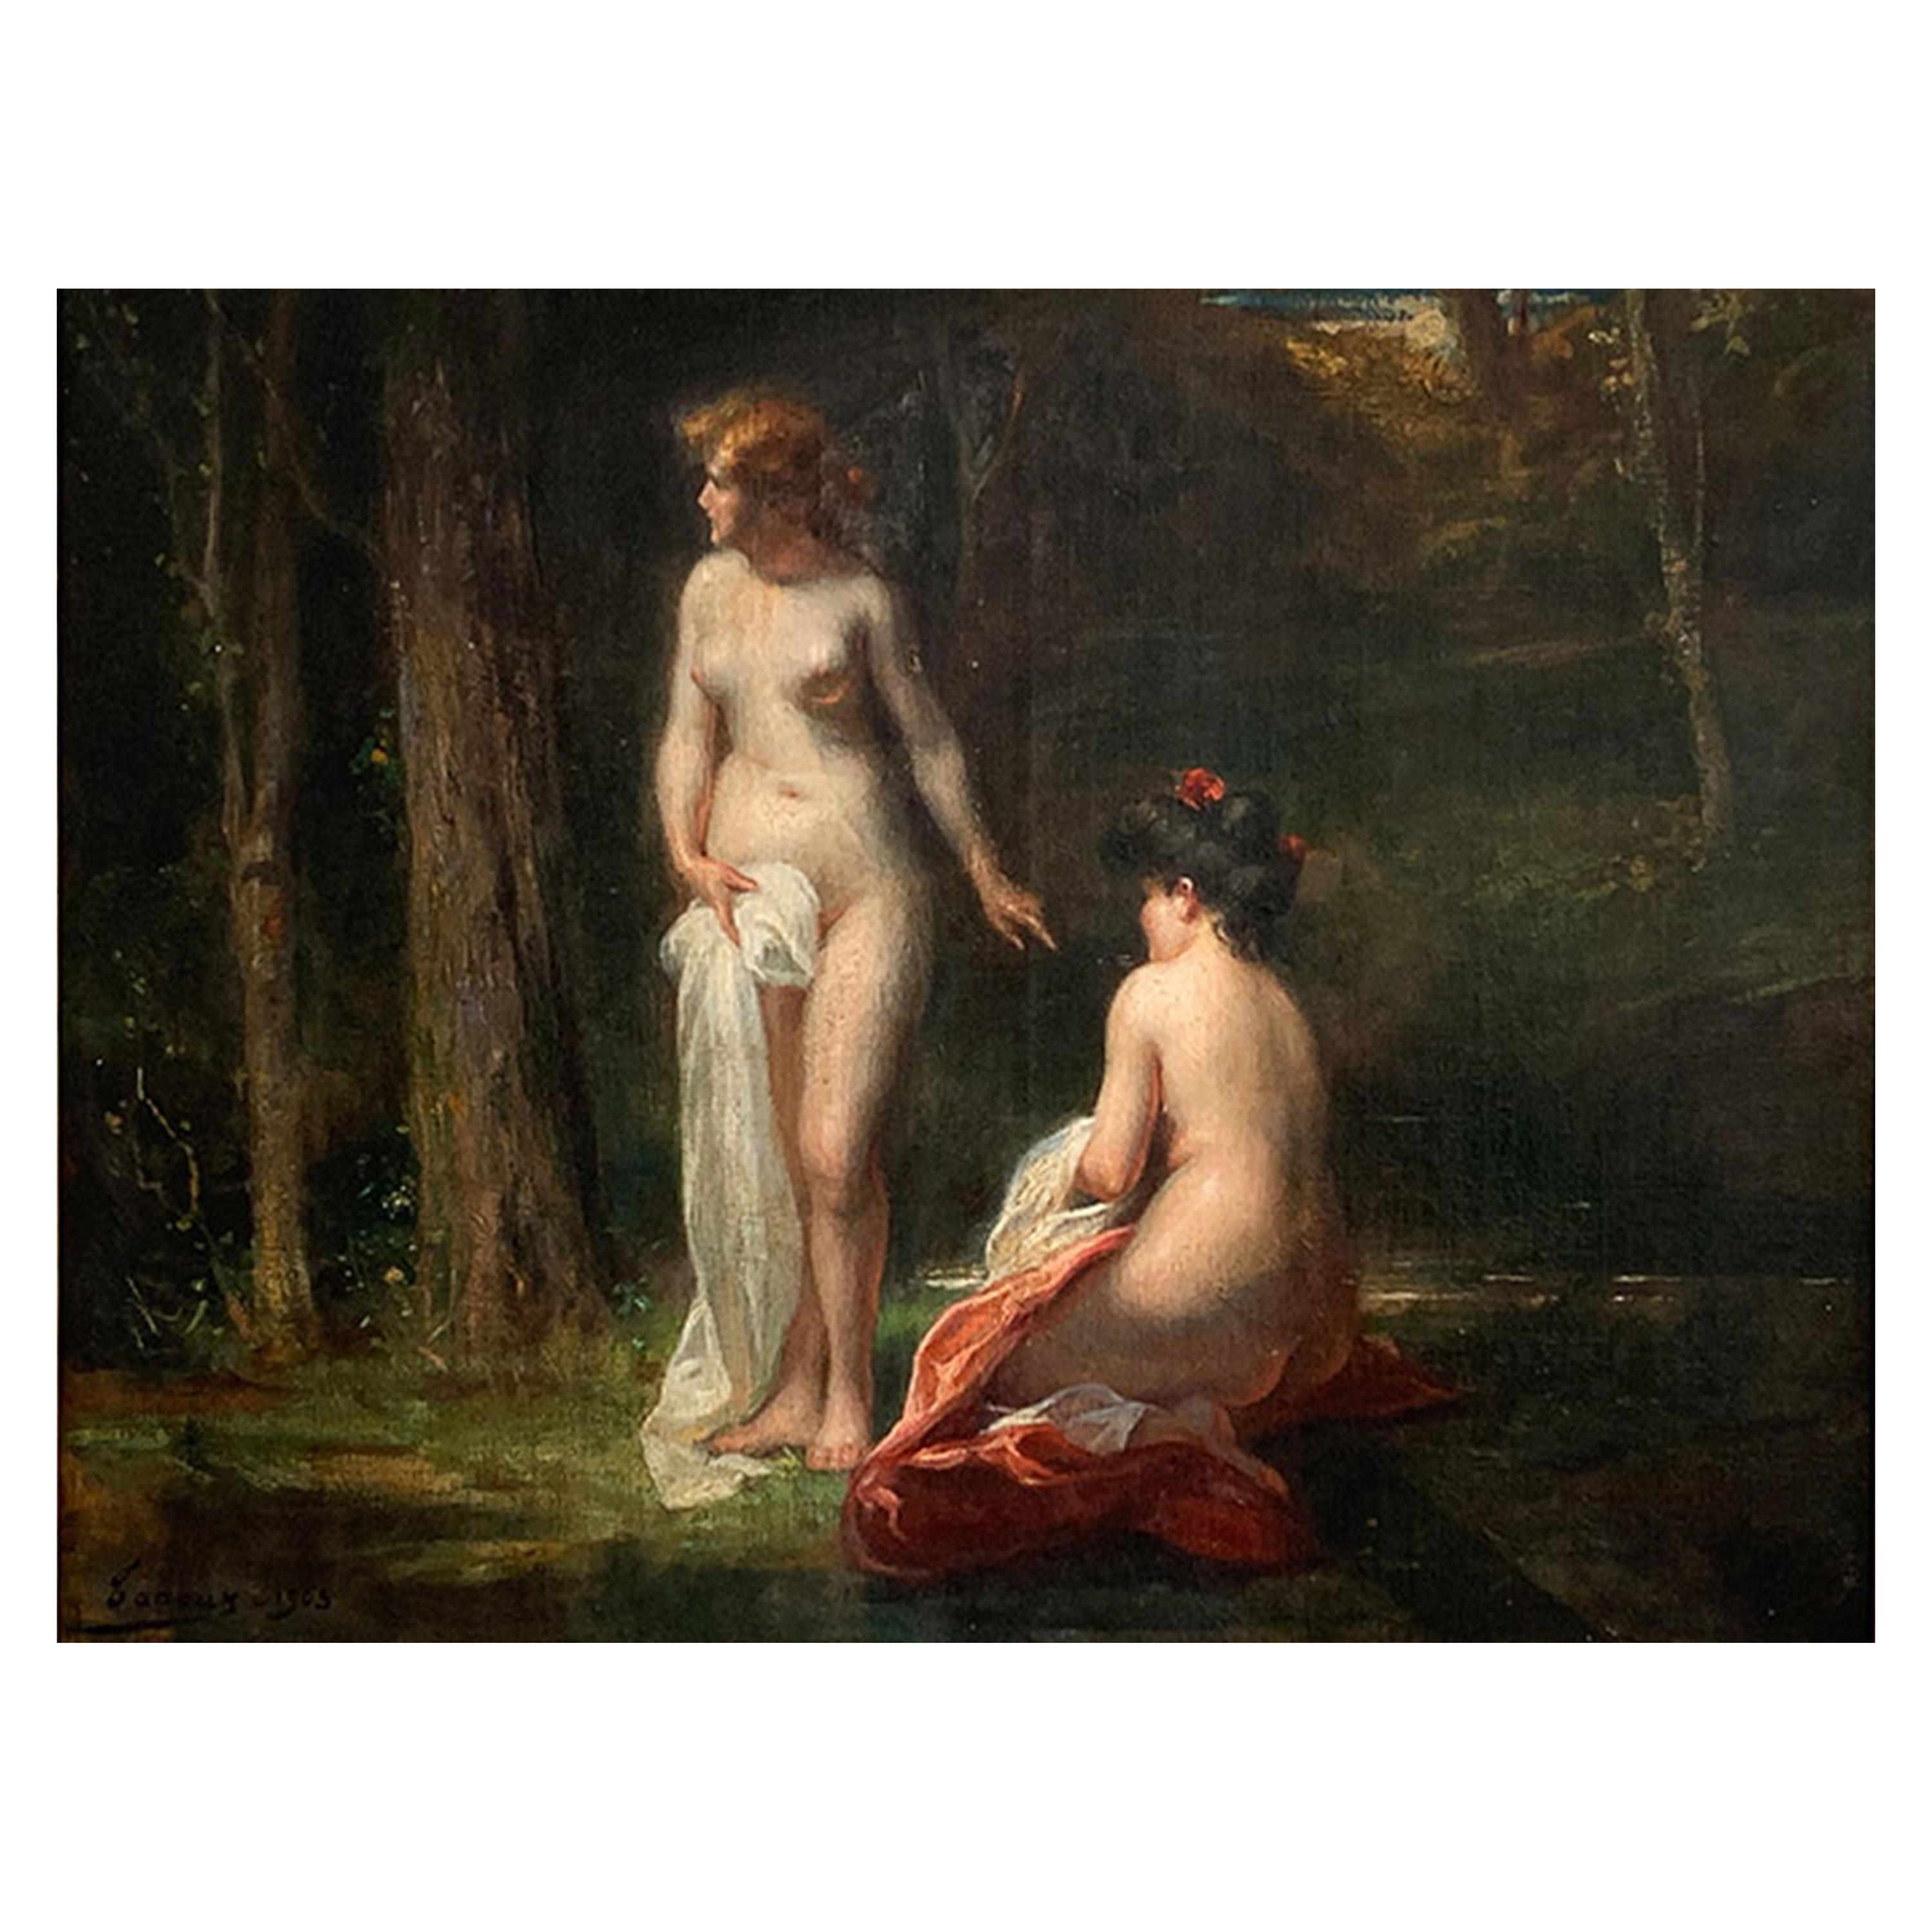 Tanoux Adrien "The Bathers" For Sale